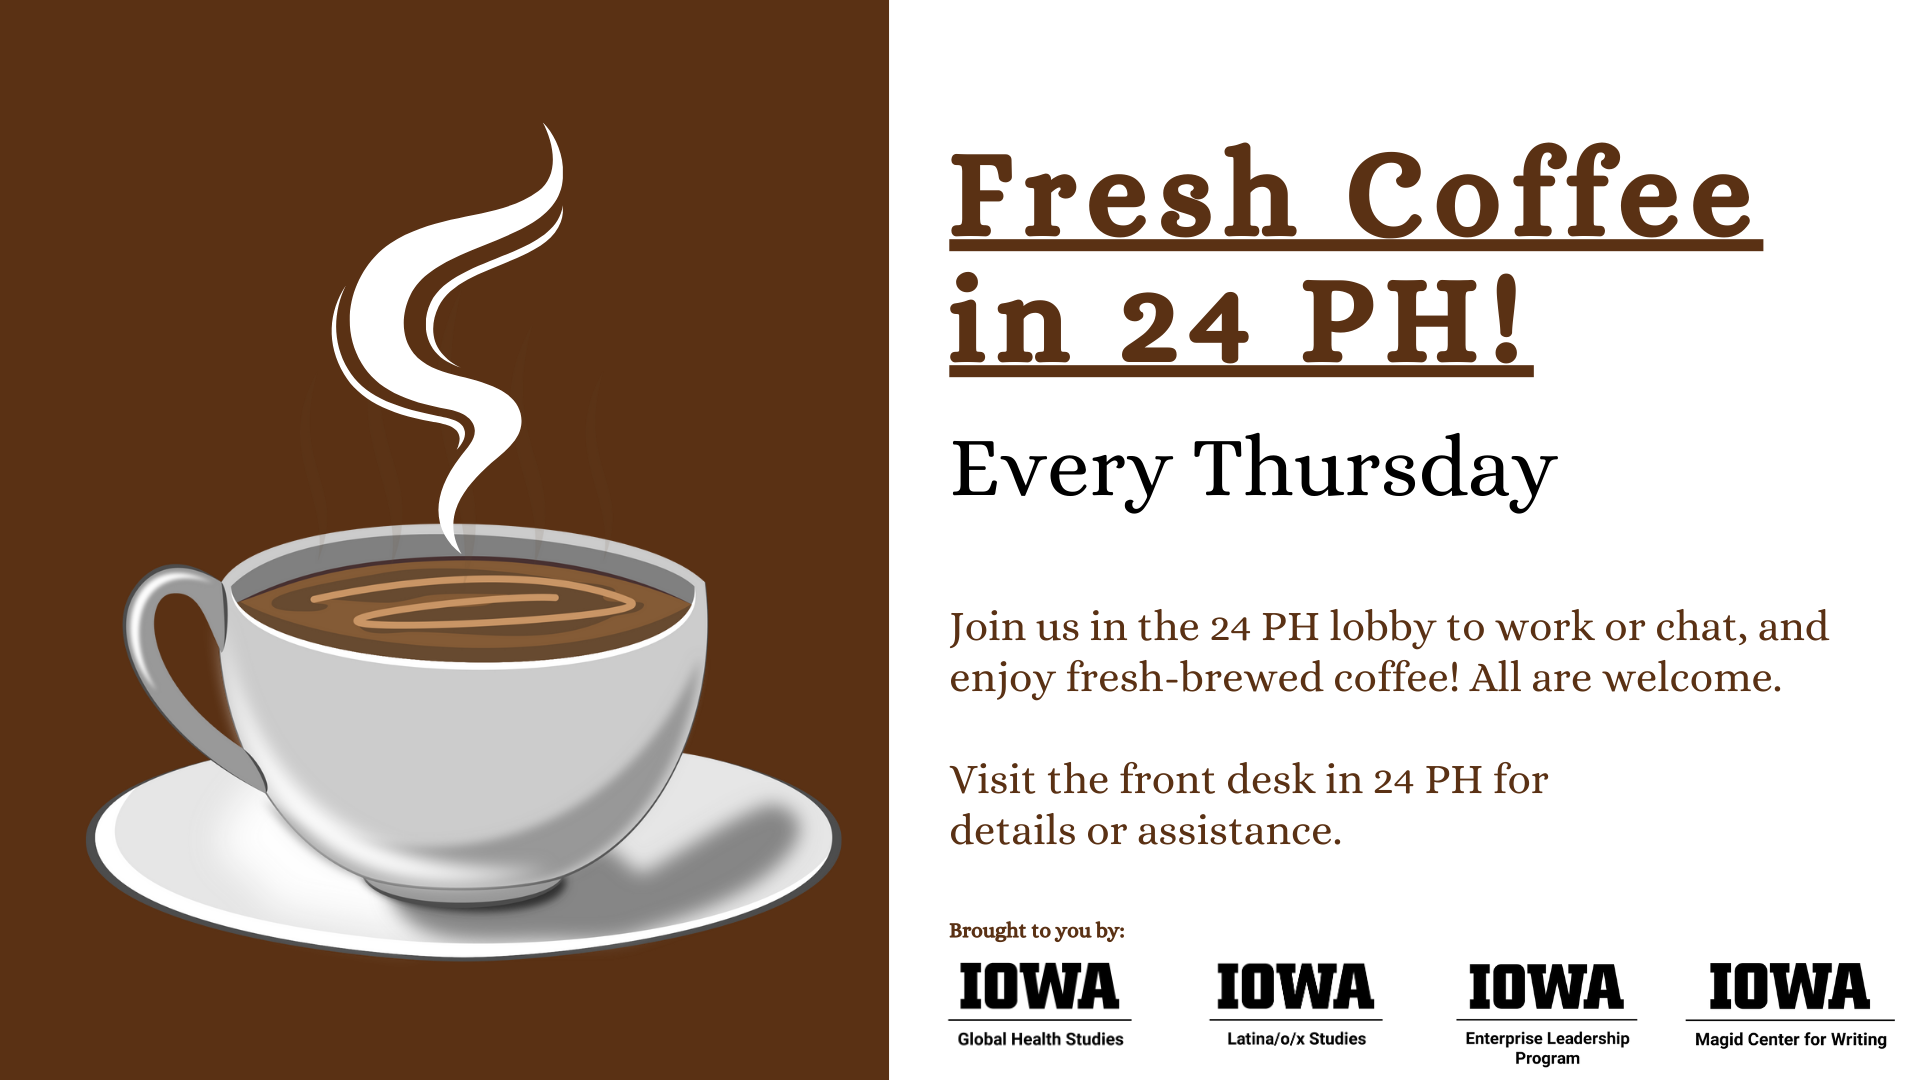 Fresh Coffee every Thursday in 24 PH! All are welcome.